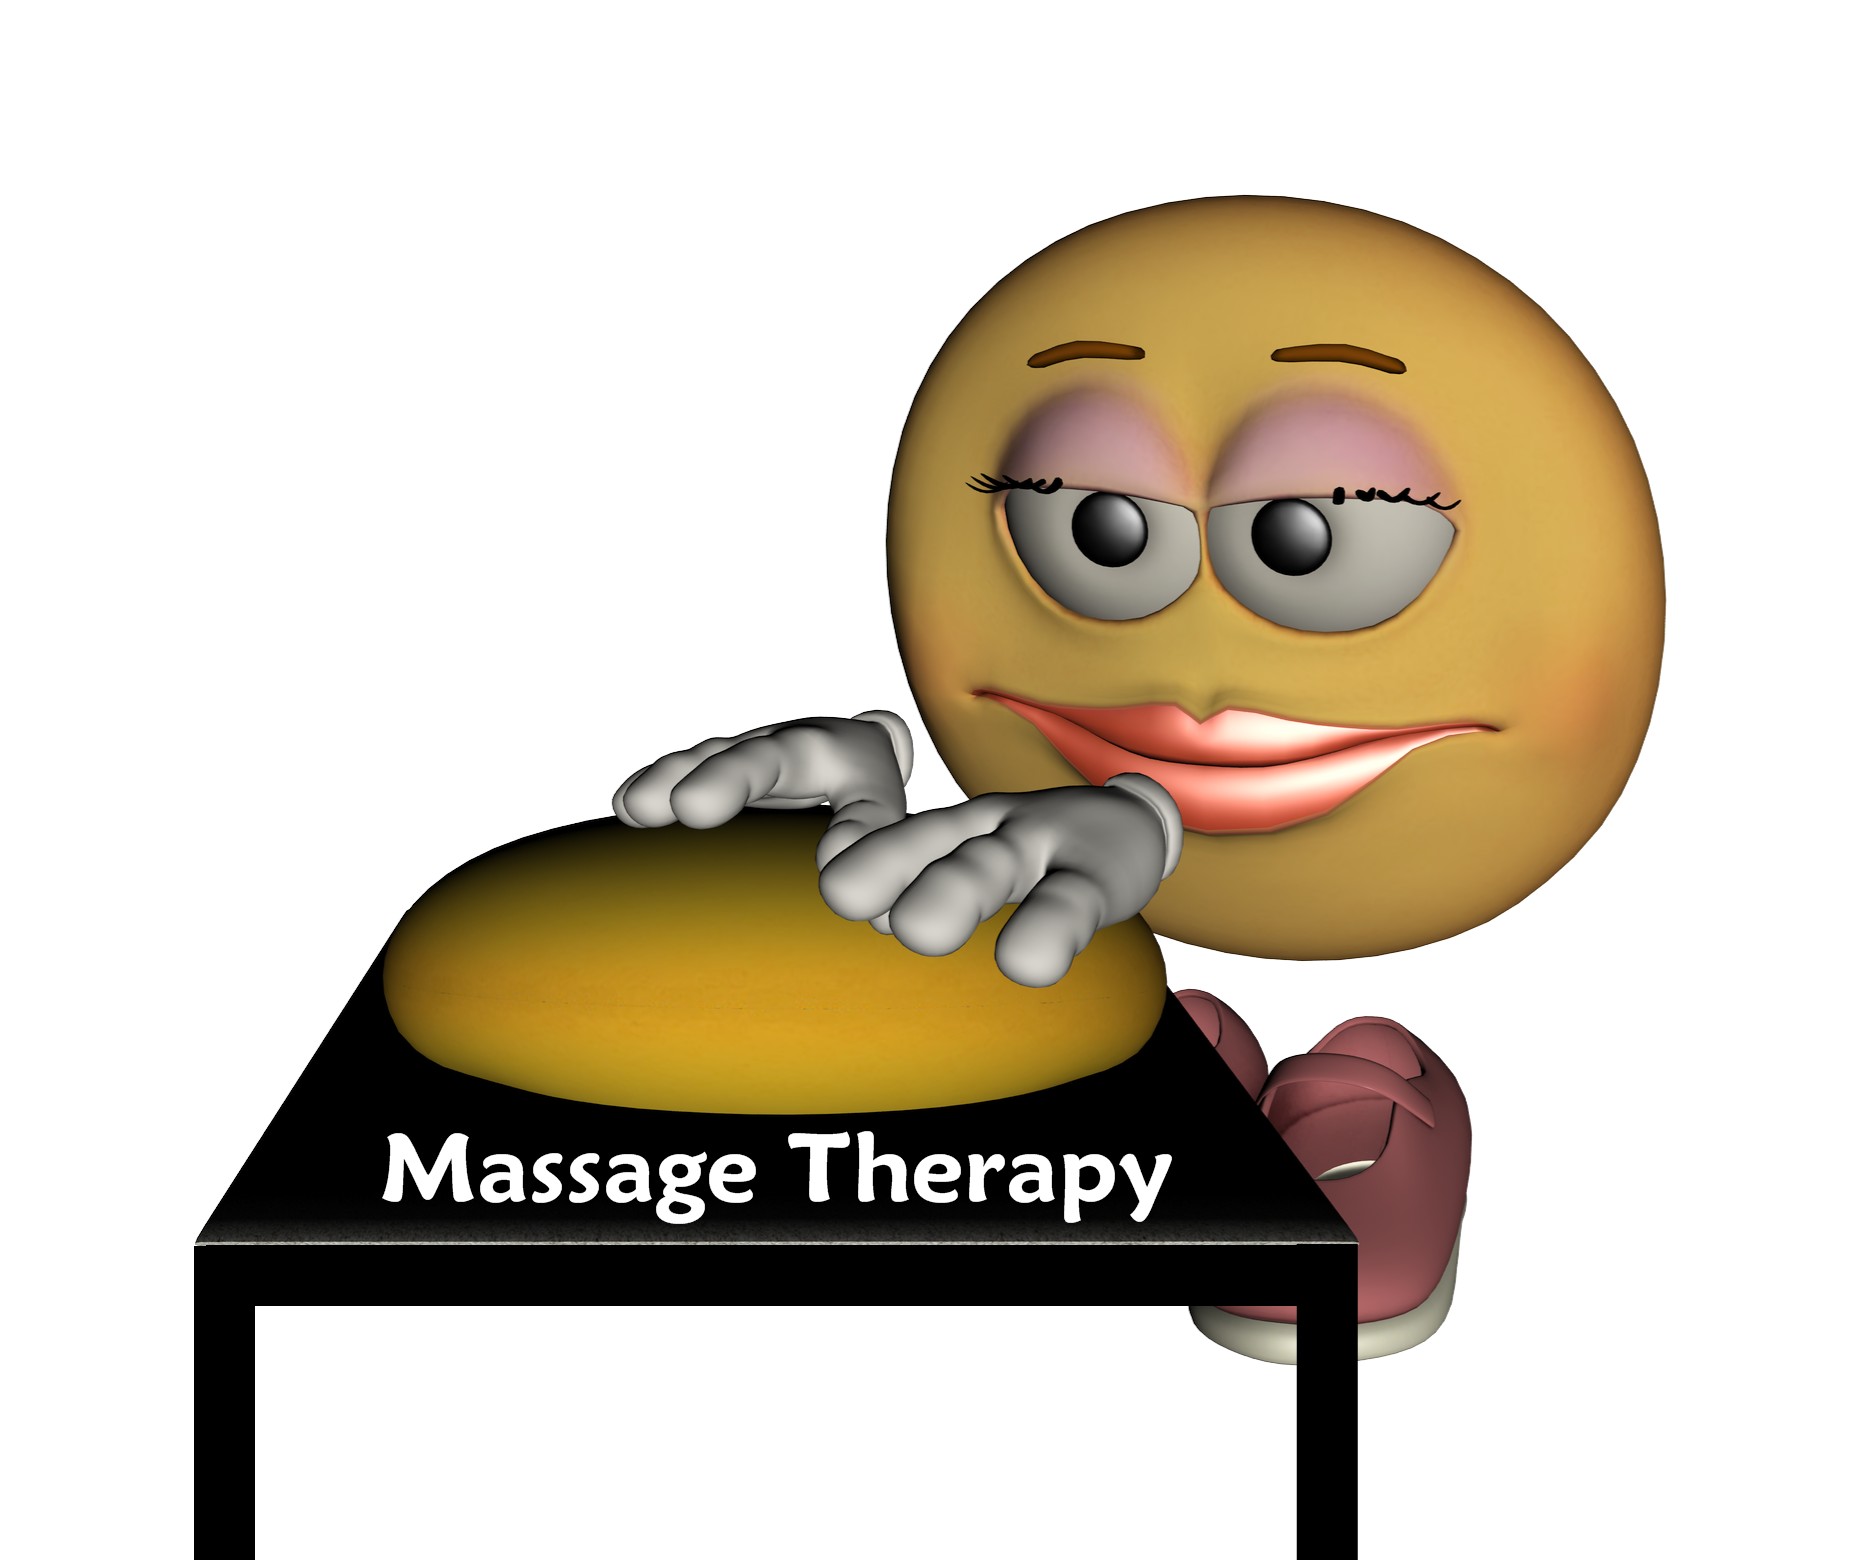 Free Photo Massage Therapy Cartoon Clipart Happy Free Download Jooinn 